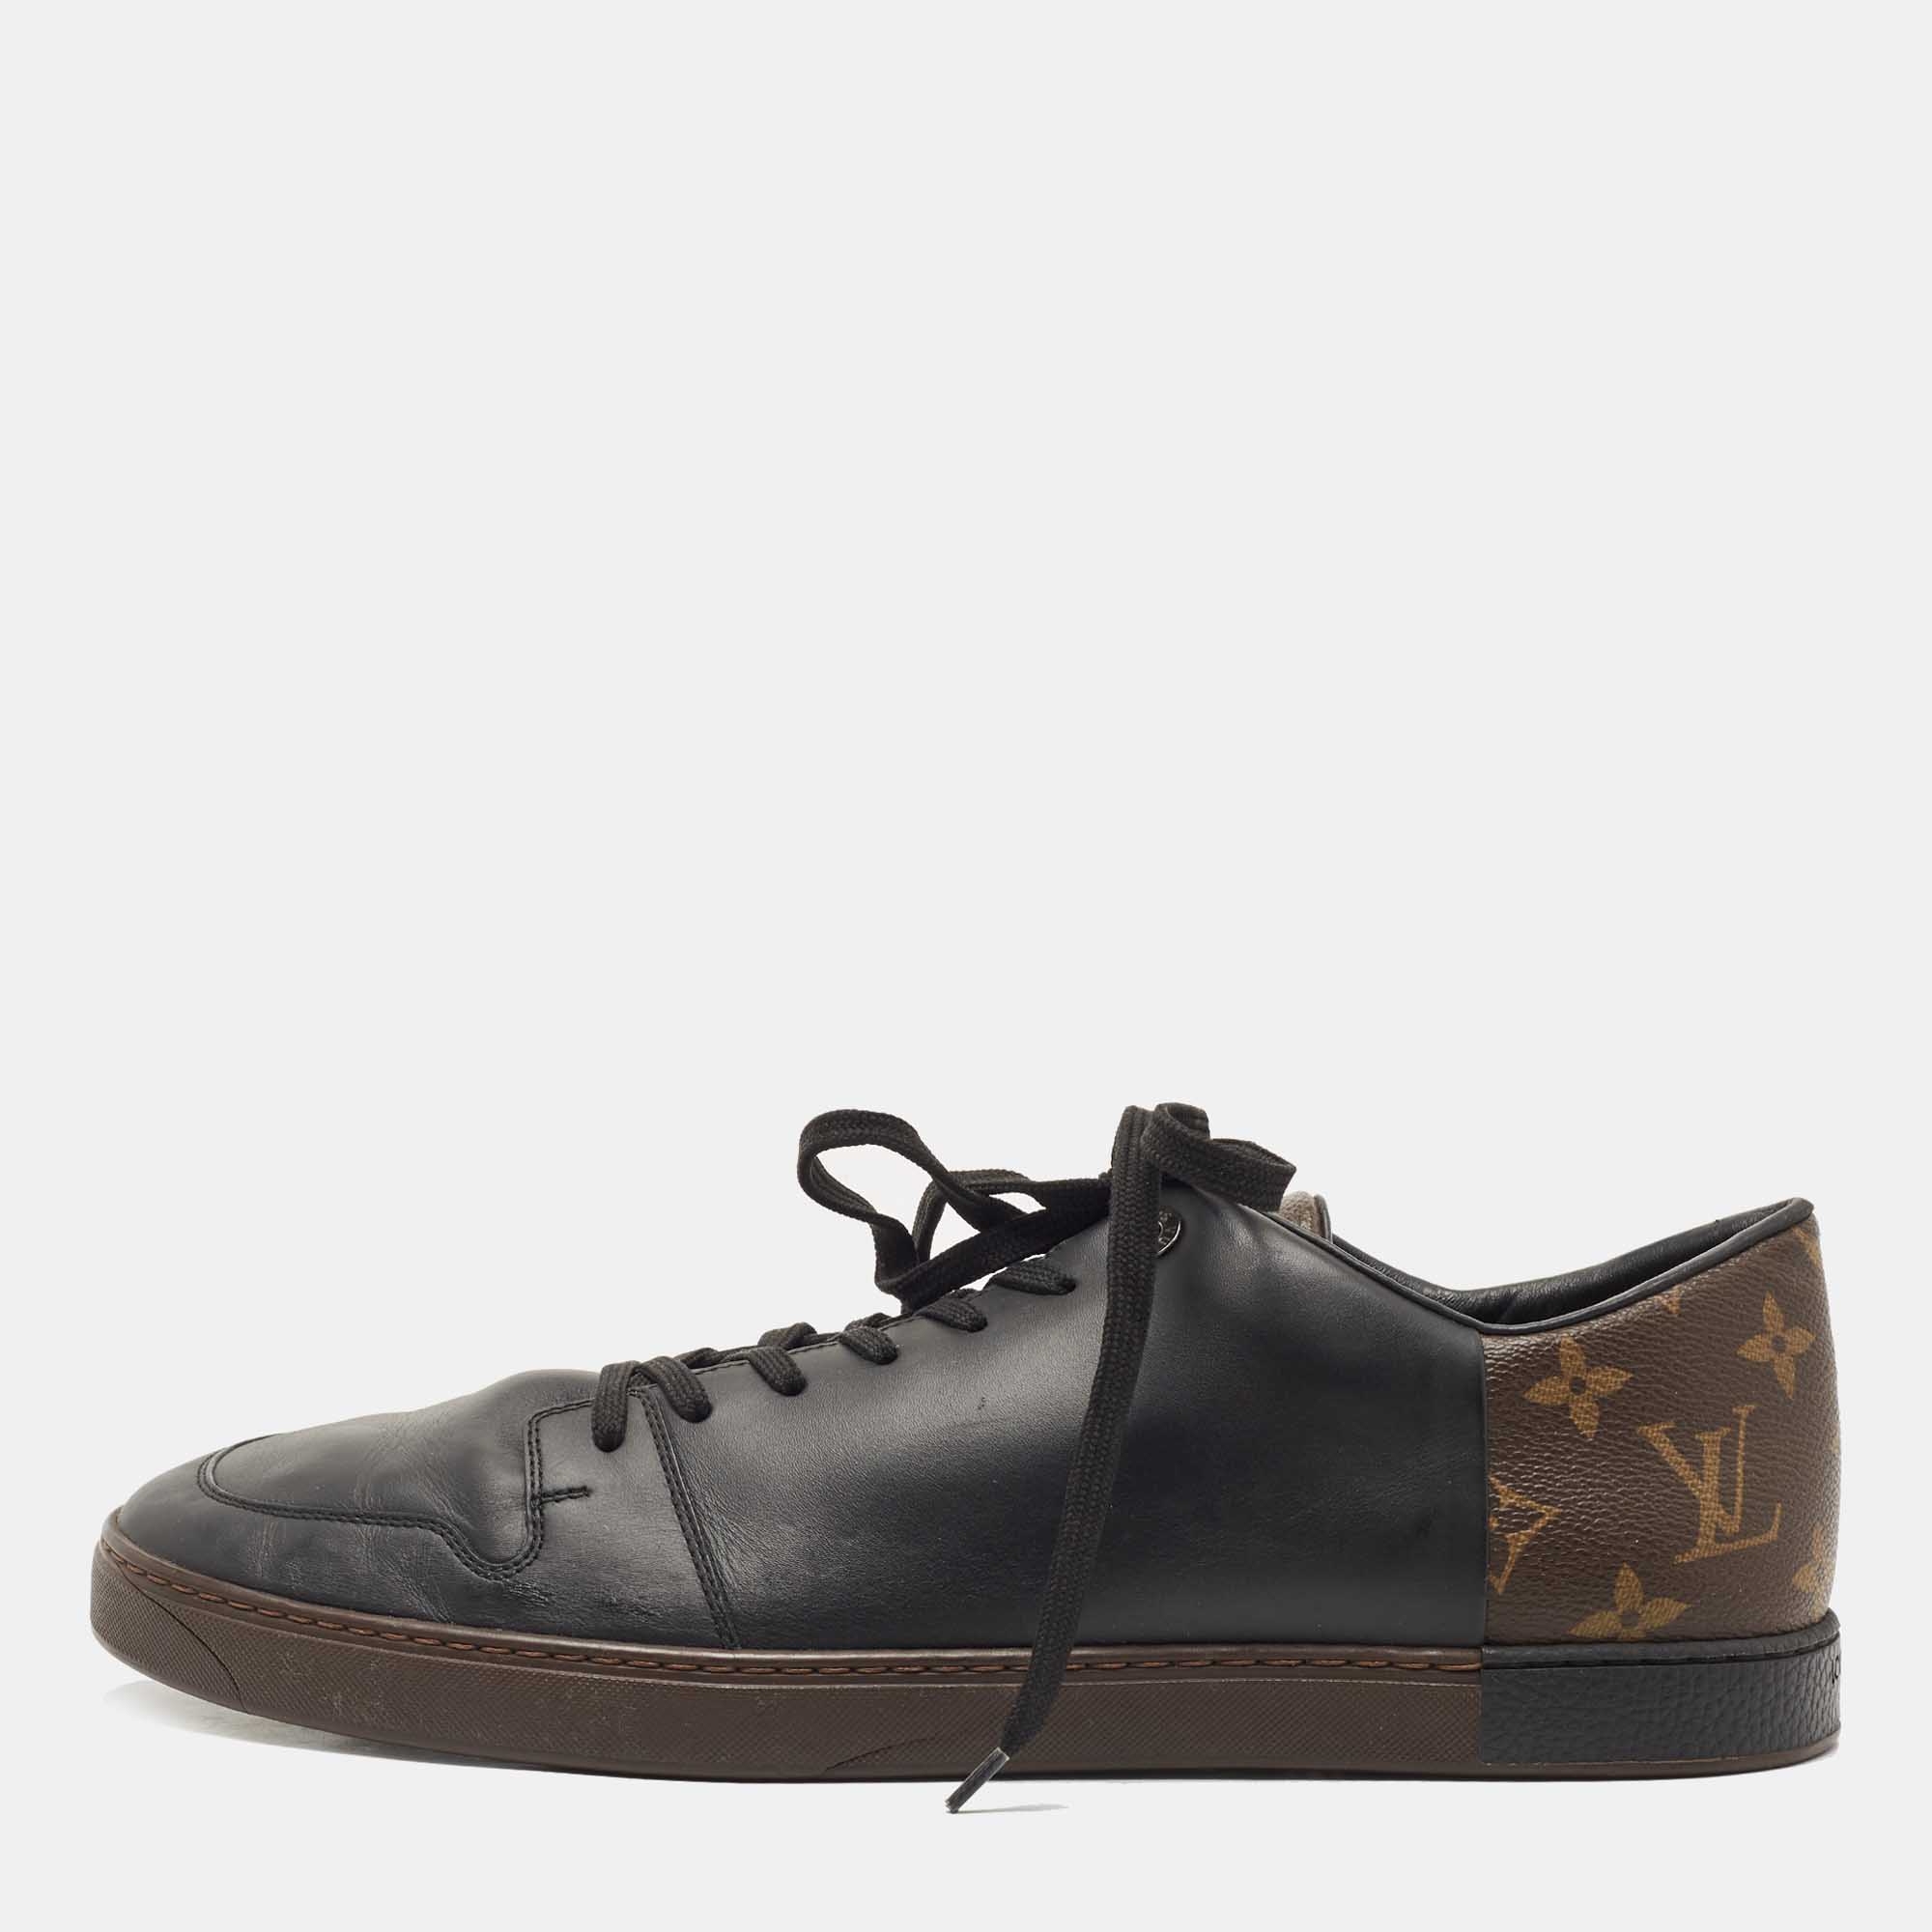 Louis Vuitton Black Leather And Monogram Canvas Line Up Sneakers Size 43